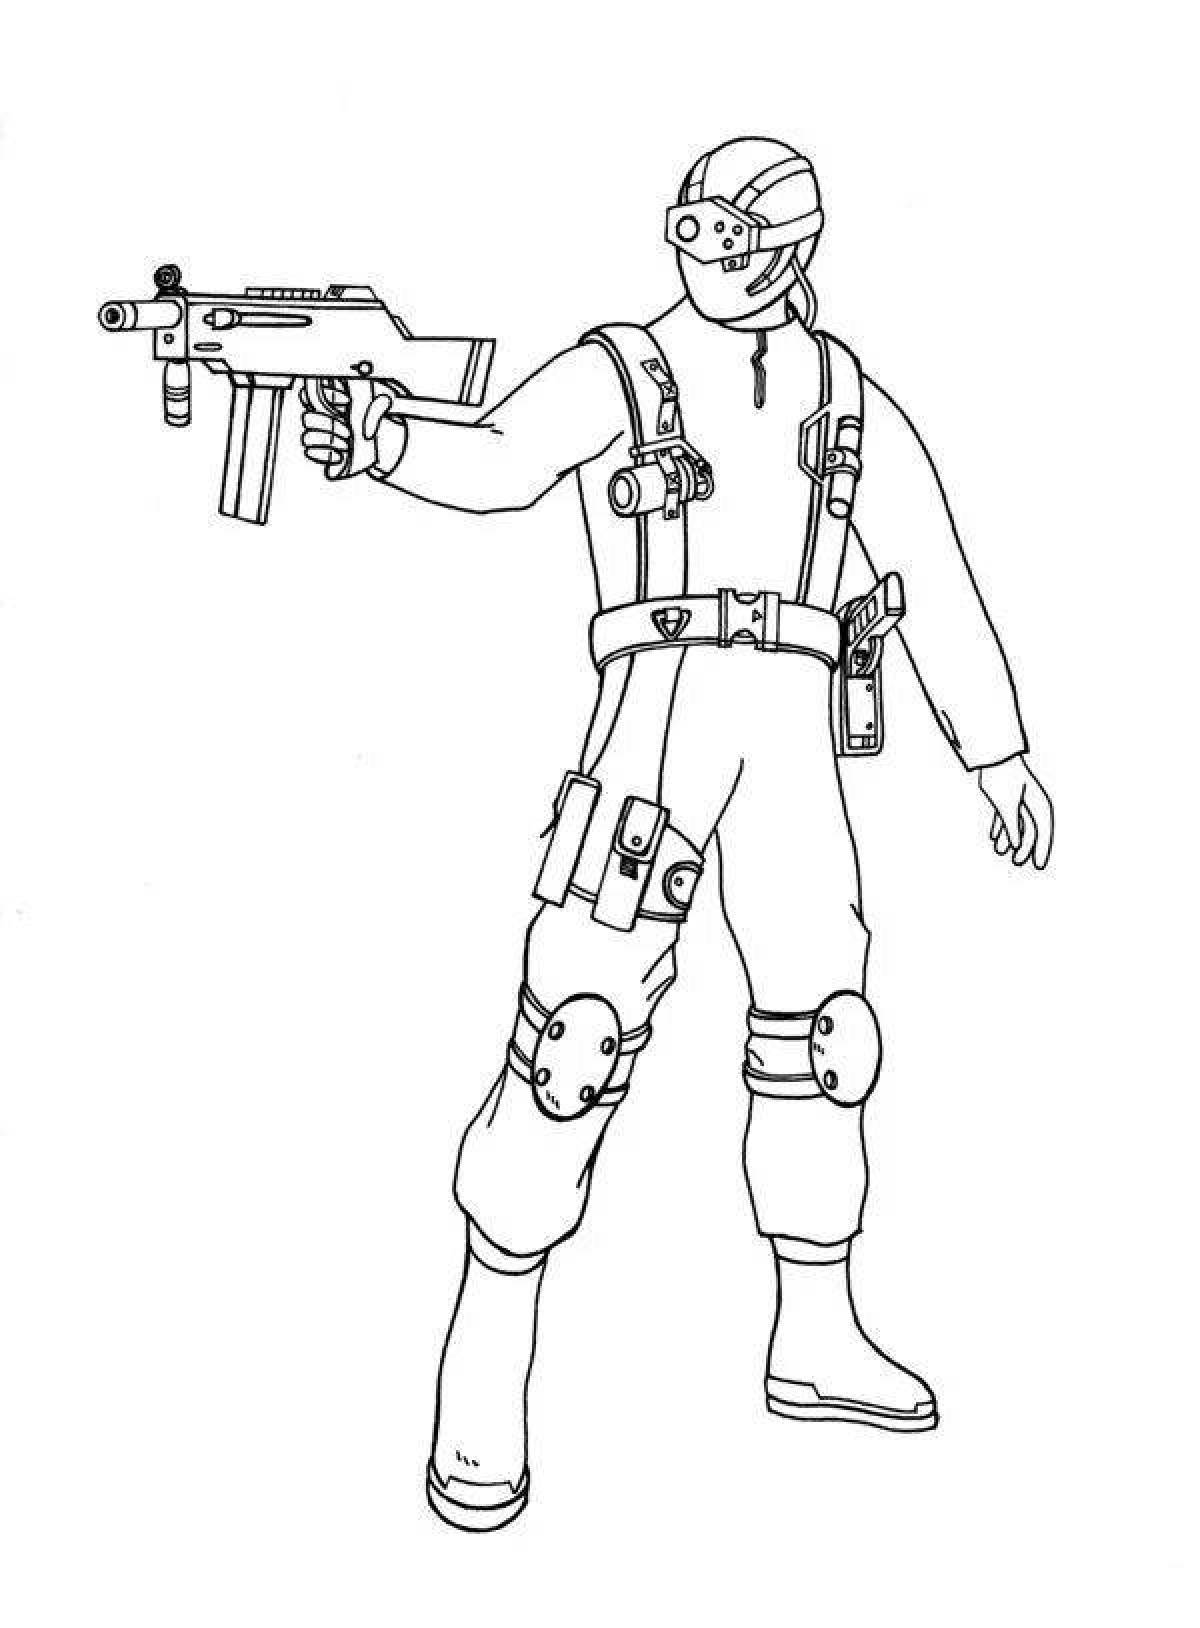 Coloring book impregnable soldier with a machine gun